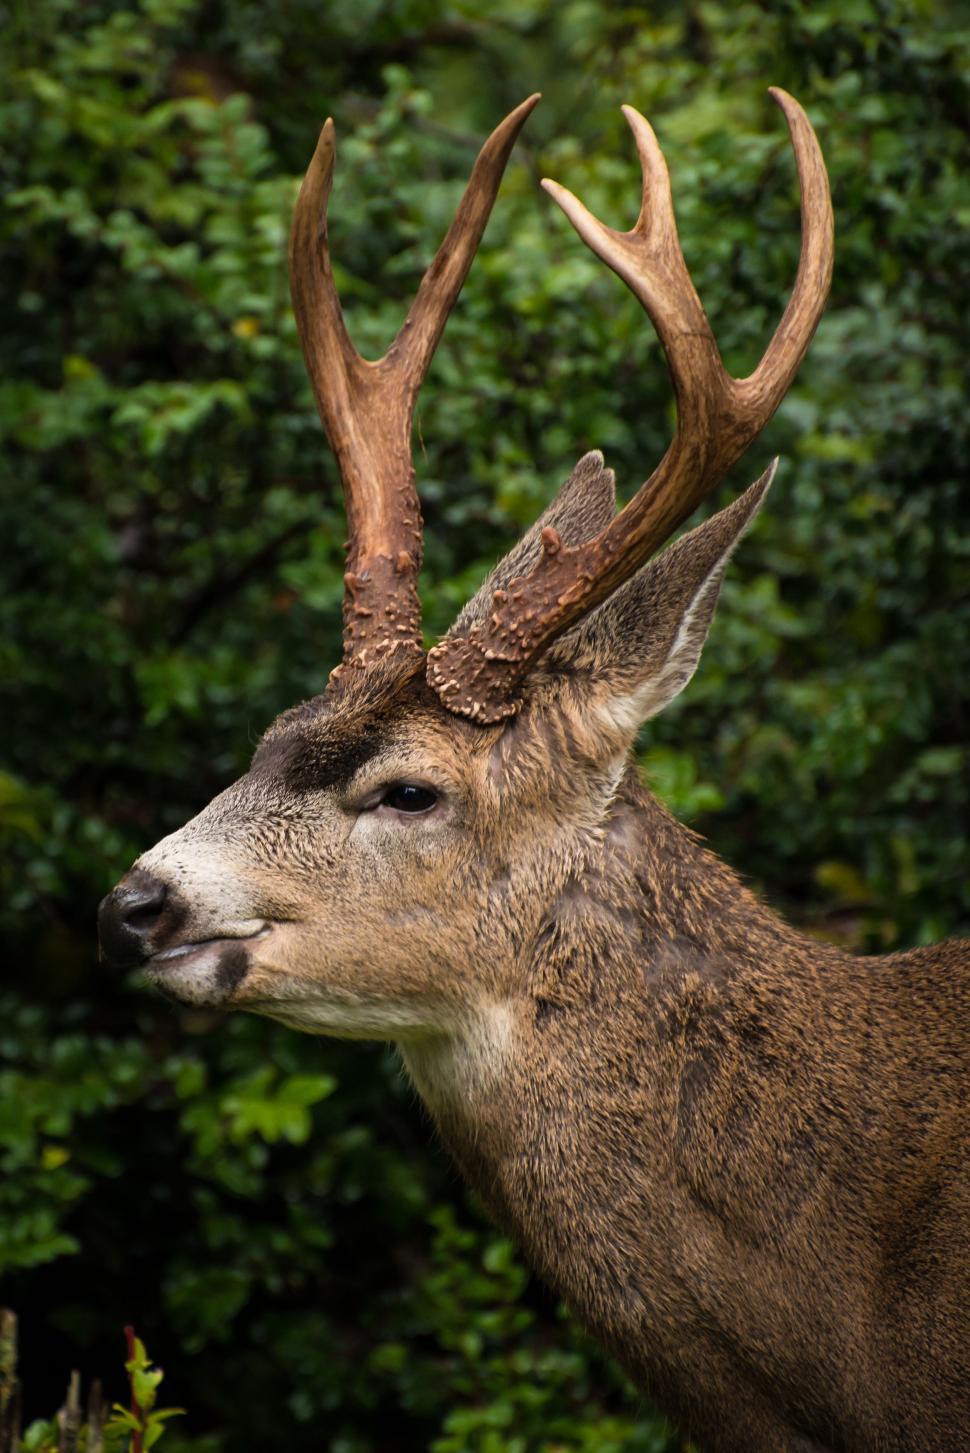 Free Image of Close-Up of a Deer With Antlers on Its Head 